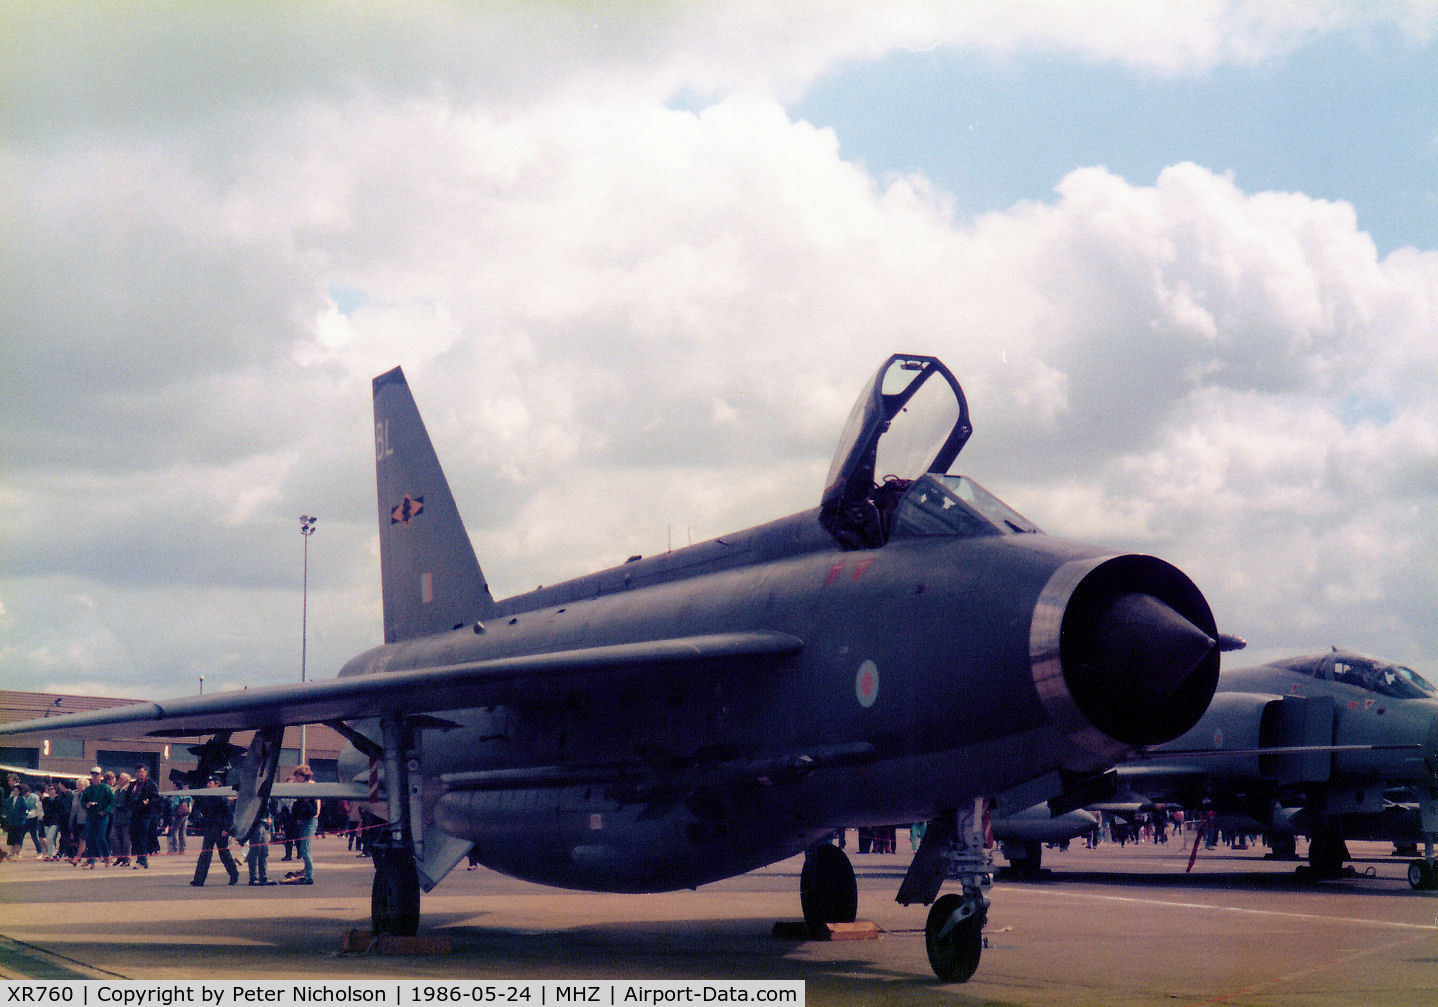 XR760, 1965 English Electric Lightning F.6 C/N 95225, Another view of the 11 Squadron Lightning F.6 from RAF Binbrook on display at the 1986 RAF Mildenhall Air Fete.